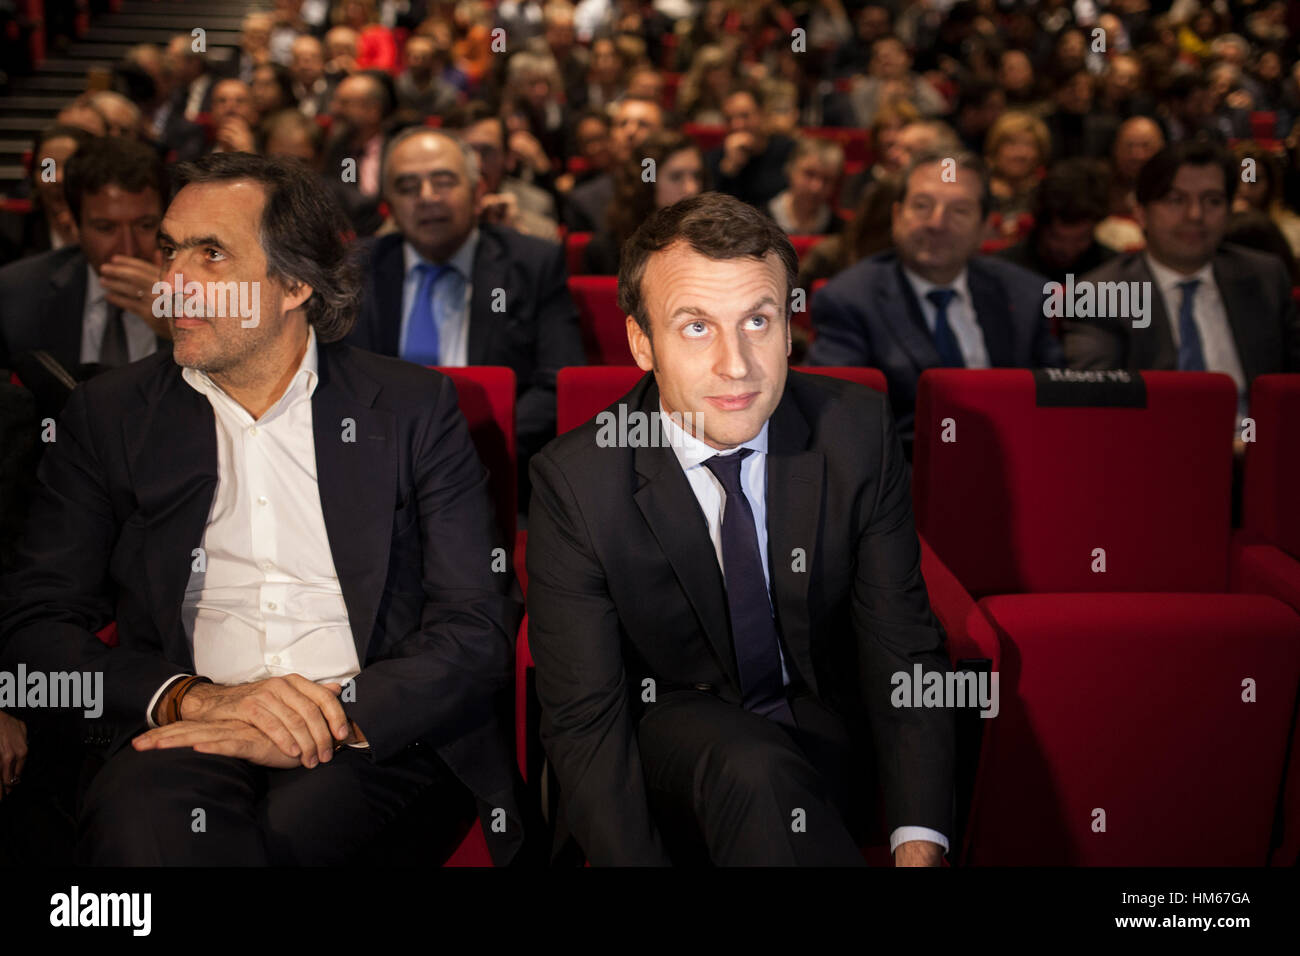 Emmanuel Macron in Beyrouth, Lebanon -  Lebanon / Beirut  -  Emmanuel Macron, candidate for the French presidential election in April 2017 with his movement 'En Marche!', During a meeting with the French and economic community at ESA (Ecole superieure des Affaires, a Franco-Lebanese cooperation project) on the Theme: 'France, a revolution Economic and social development for the 21st century ' Emmanuel Macron went to Beirut to meet on 24 January 2017, Michel Aoun the President of the Lebanese Republic, then Saad Hariri the Lebanese Prime Minister.    -  Bilal Tarabey / Le Pictorium Stock Photo